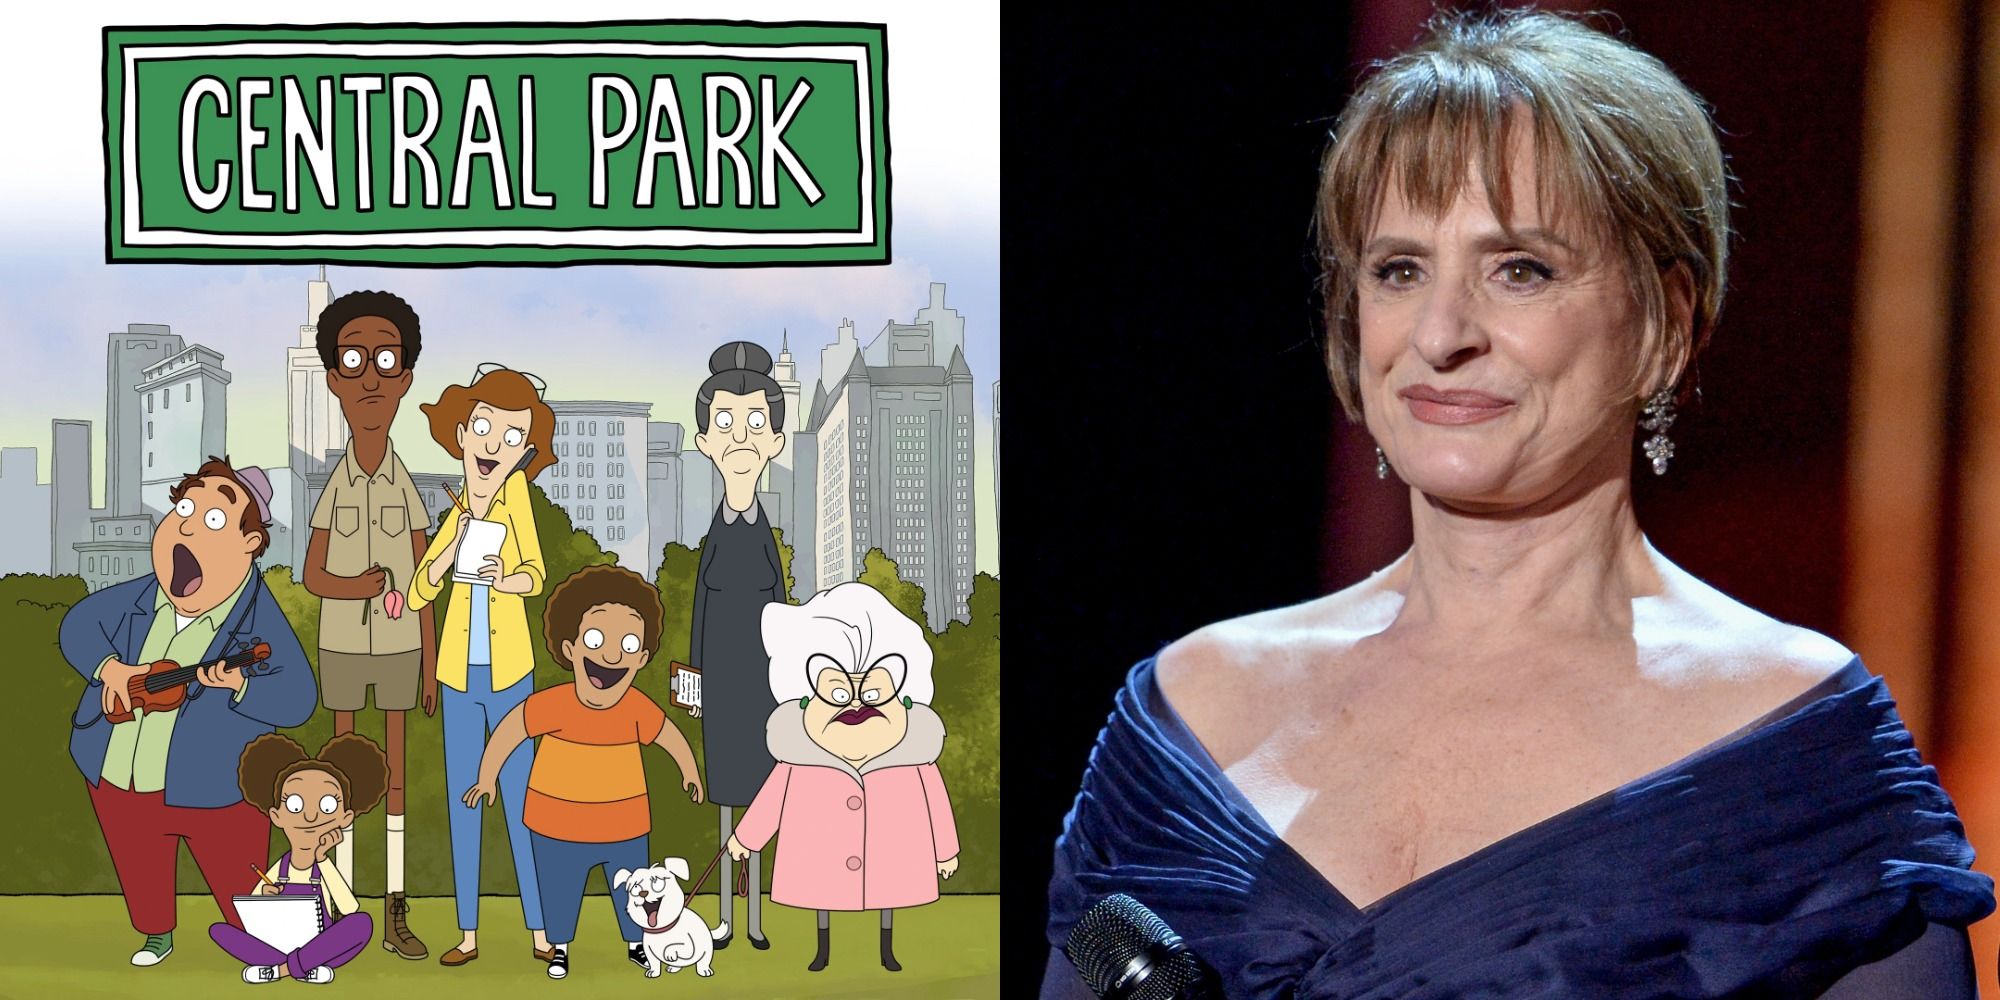 Split image showing characters from Central Park and Patti LuPone.